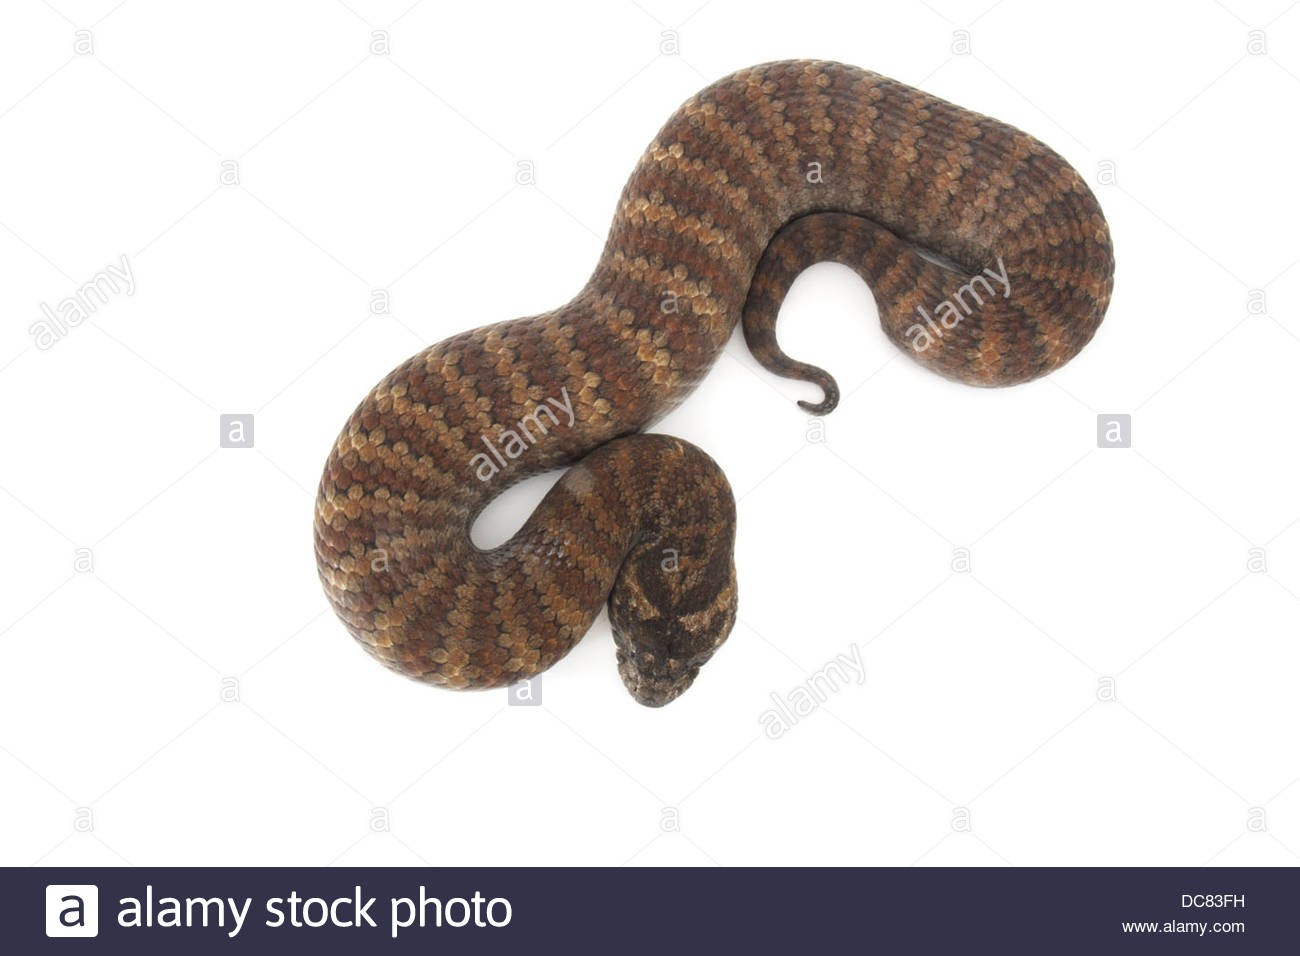 Death Adder Photographed On A White Background Digitally Adjusted